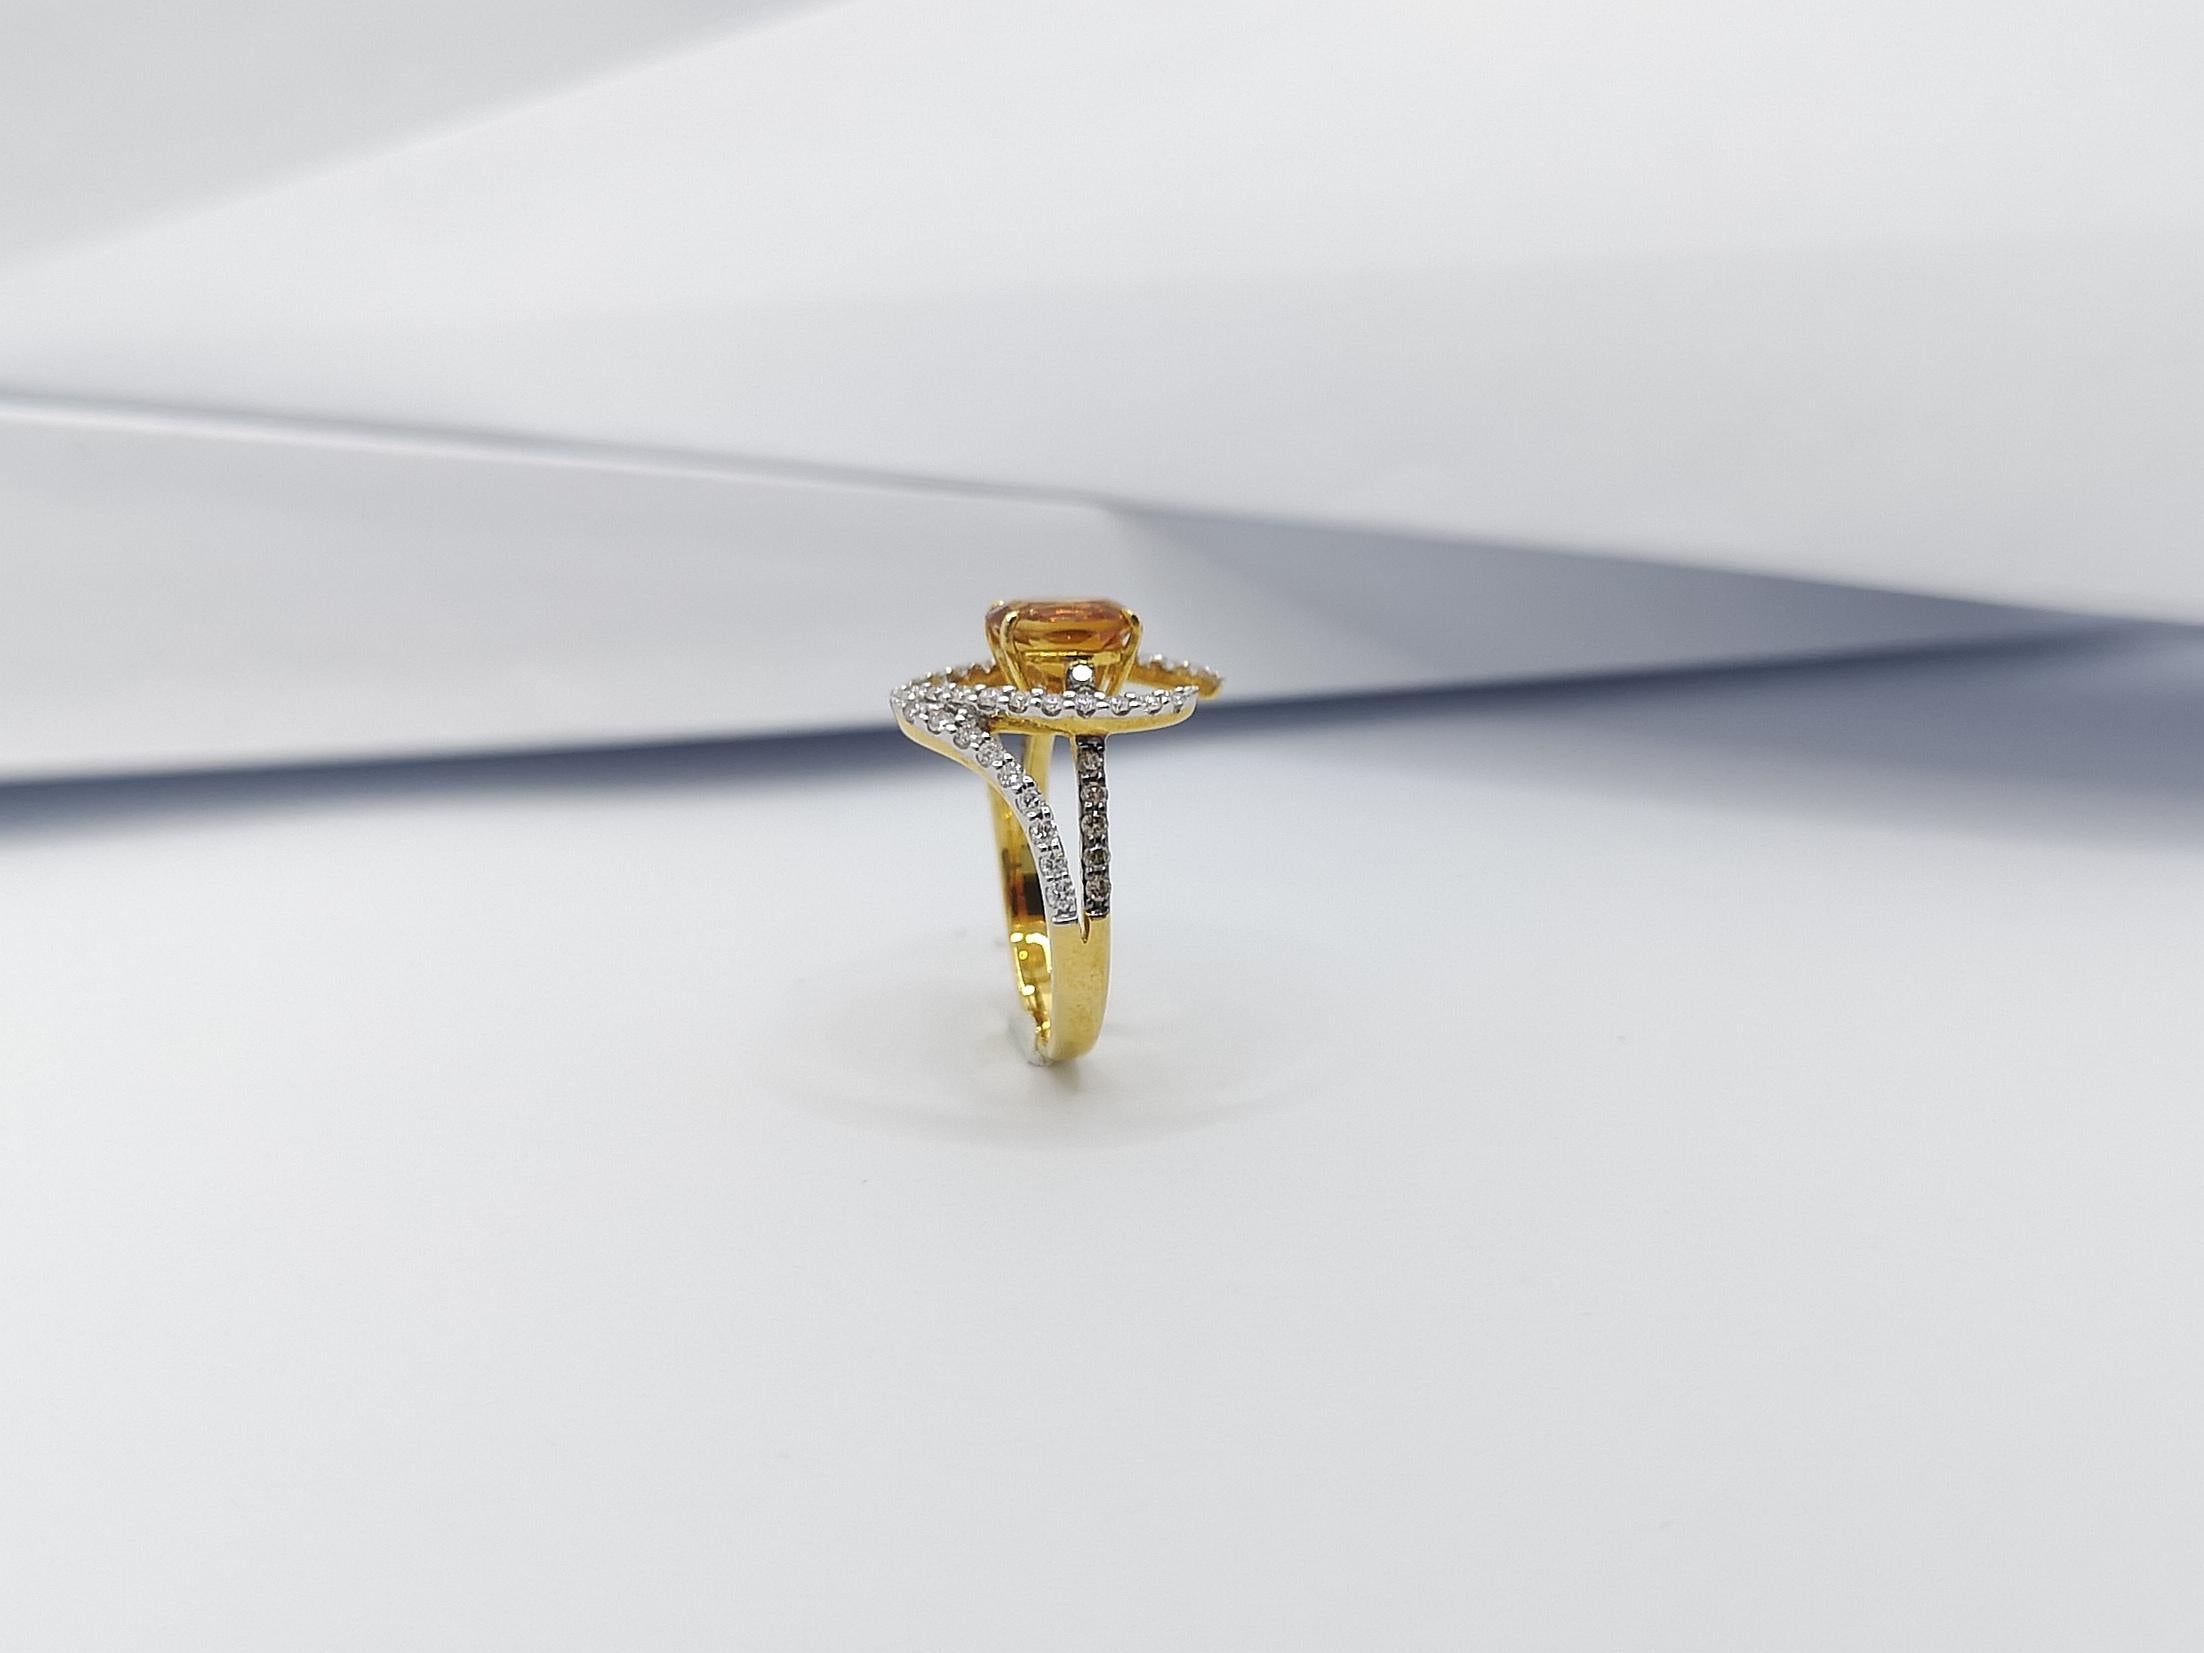 Citrine, Brown Diamond and Diamond Ring Set in 18k Gold by Kavant & Sharart 7